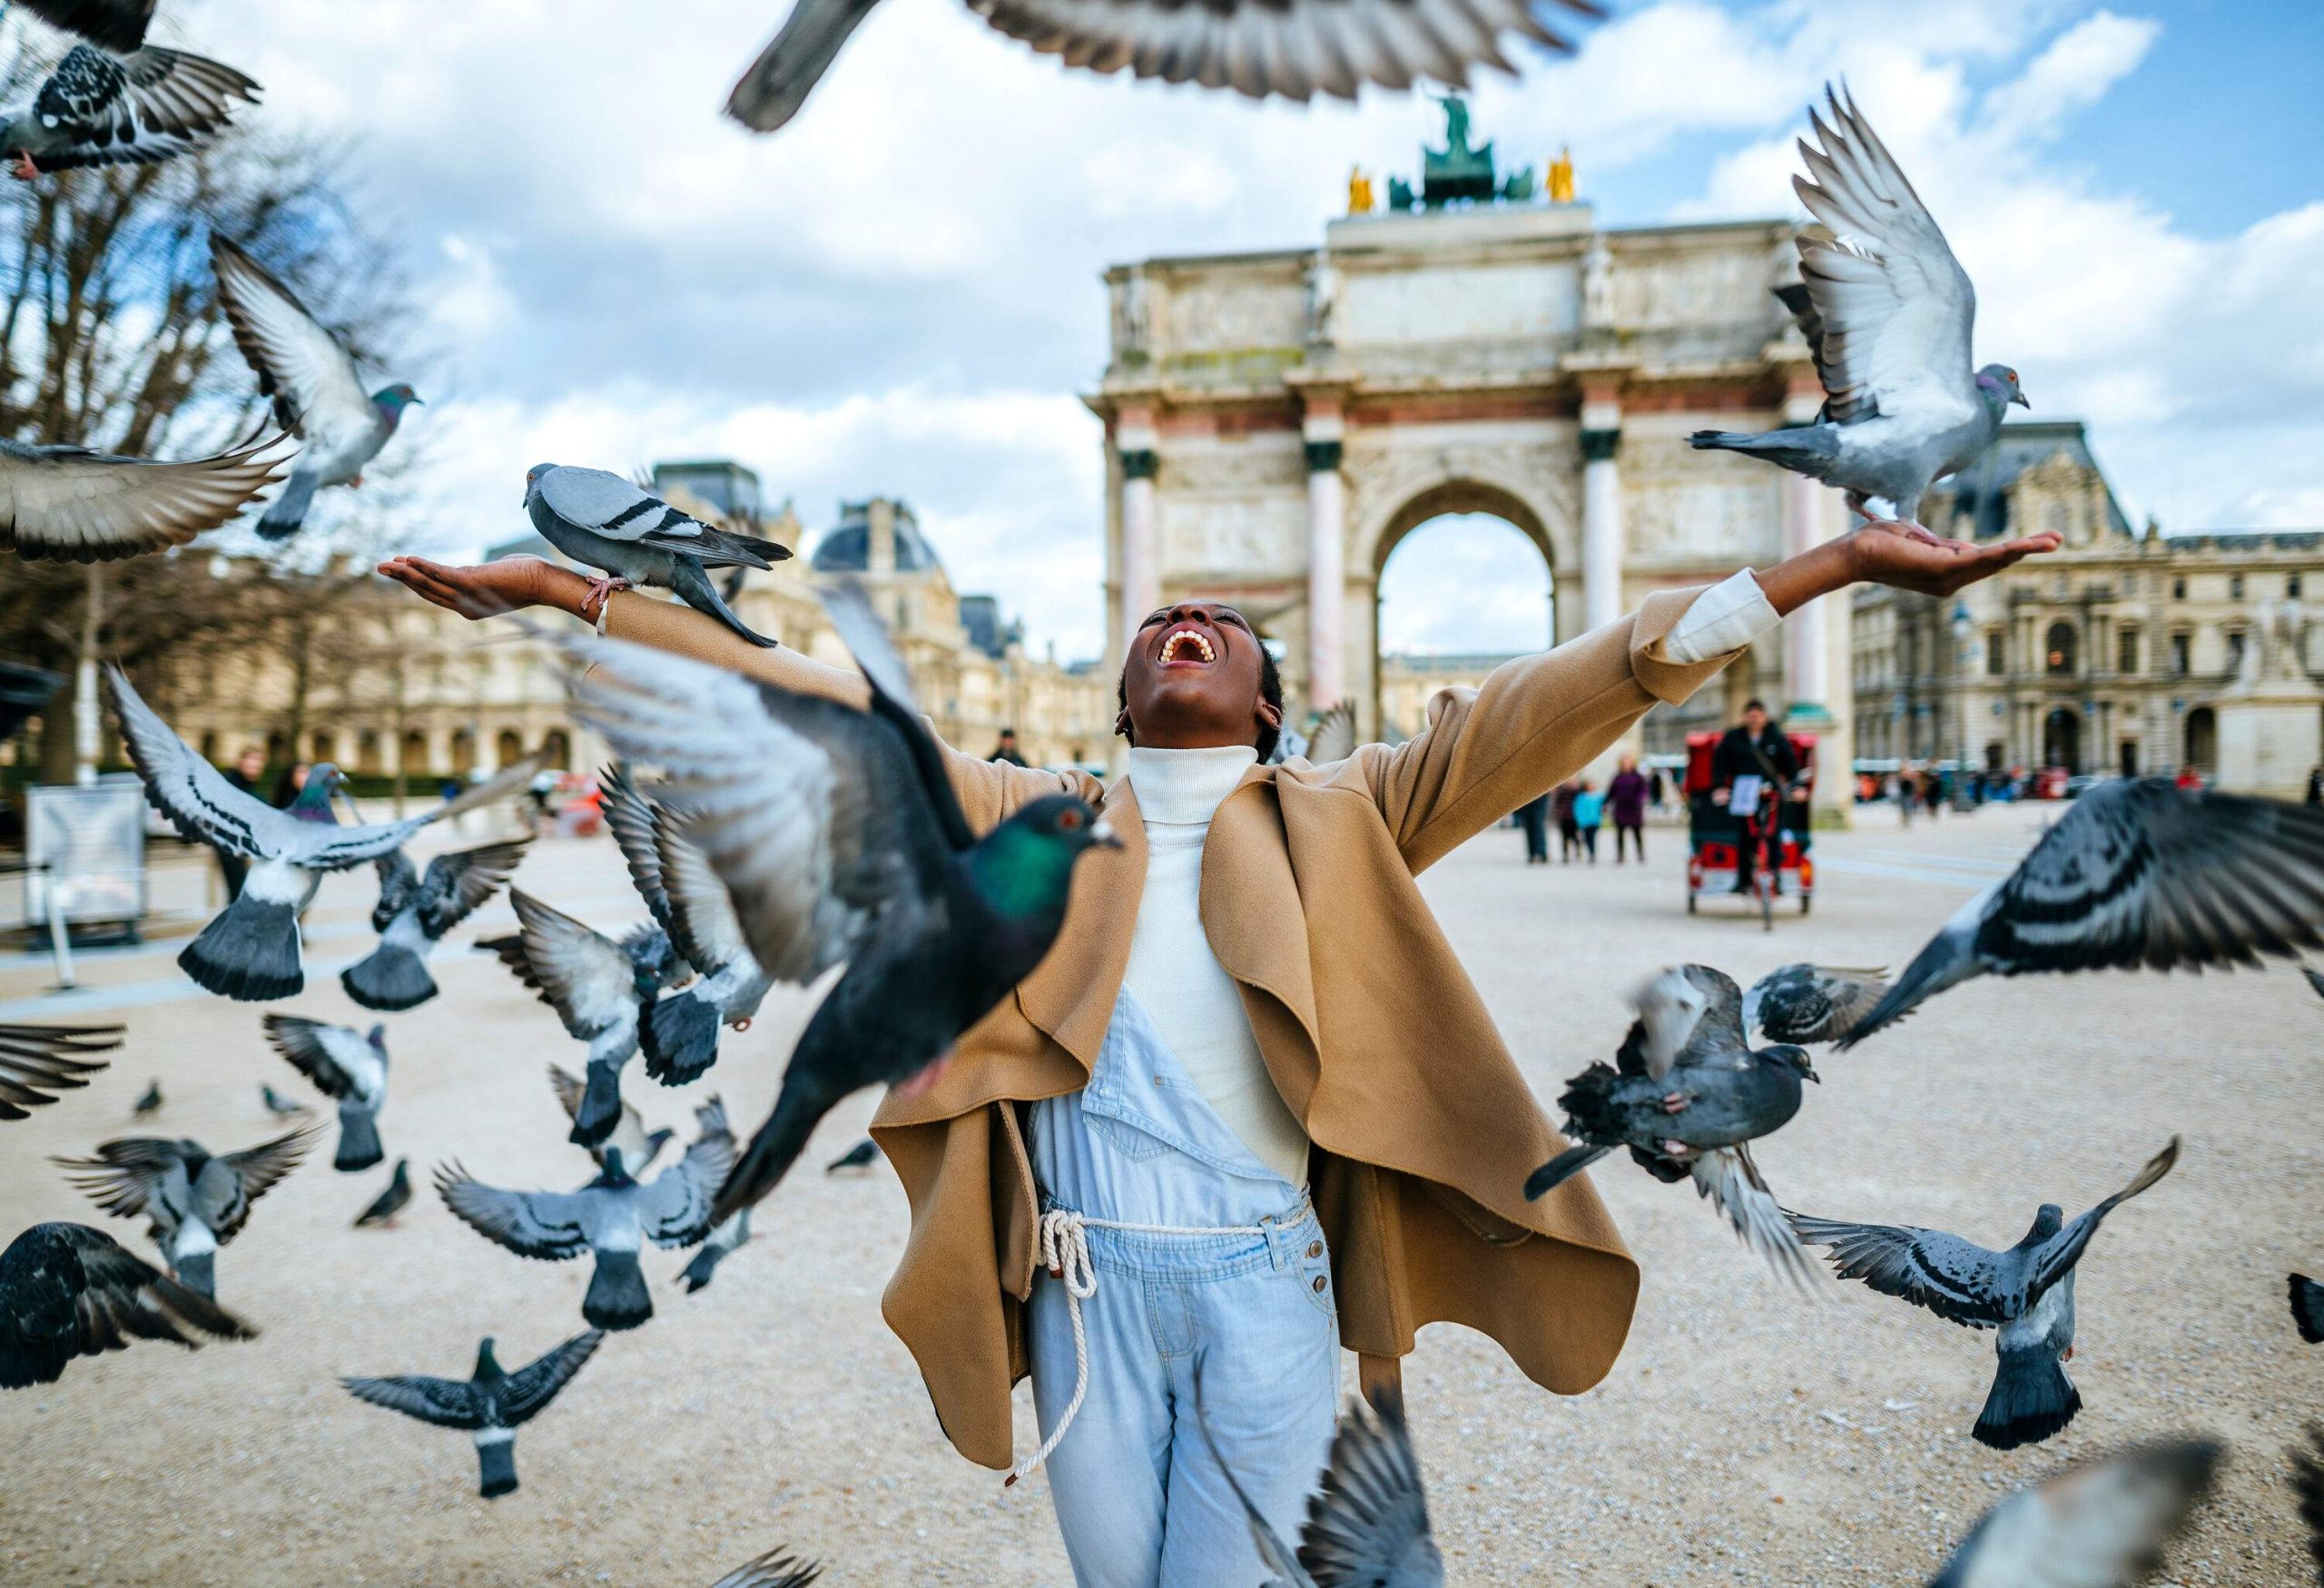 A joyful woman raises her hands in delight as she is surrounded by a flock of flying doves on the street, with the iconic Arc de Triomphe in Paris serving as a majestic backdrop.